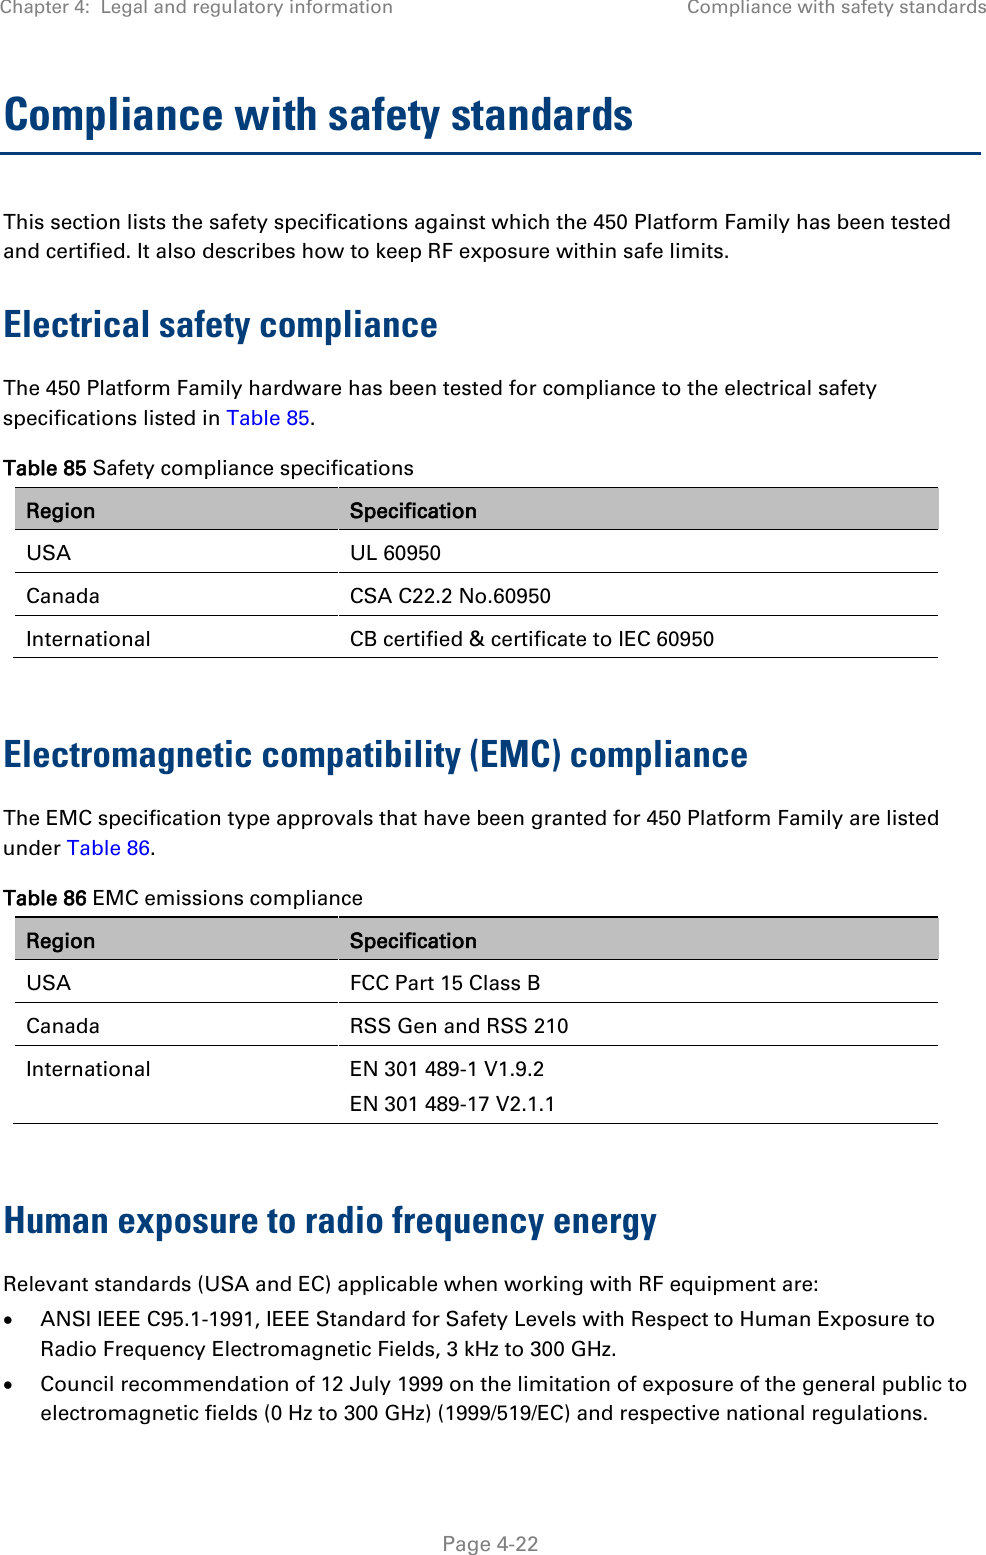 Chapter 4:  Legal and regulatory information Compliance with safety standards   Page 4-22 Compliance with safety standards This section lists the safety specifications against which the 450 Platform Family has been tested and certified. It also describes how to keep RF exposure within safe limits. Electrical safety compliance  The 450 Platform Family hardware has been tested for compliance to the electrical safety specifications listed in Table 85. Table 85 Safety compliance specifications Region Specification USA UL 60950 Canada  CSA C22.2 No.60950 International  CB certified &amp; certificate to IEC 60950  Electromagnetic compatibility (EMC) compliance The EMC specification type approvals that have been granted for 450 Platform Family are listed under Table 86. Table 86 EMC emissions compliance Region Specification USA FCC Part 15 Class B Canada  RSS Gen and RSS 210 International  EN 301 489-1 V1.9.2 EN 301 489-17 V2.1.1  Human exposure to radio frequency energy Relevant standards (USA and EC) applicable when working with RF equipment are: • ANSI IEEE C95.1-1991, IEEE Standard for Safety Levels with Respect to Human Exposure to Radio Frequency Electromagnetic Fields, 3 kHz to 300 GHz. • Council recommendation of 12 July 1999 on the limitation of exposure of the general public to electromagnetic fields (0 Hz to 300 GHz) (1999/519/EC) and respective national regulations. 